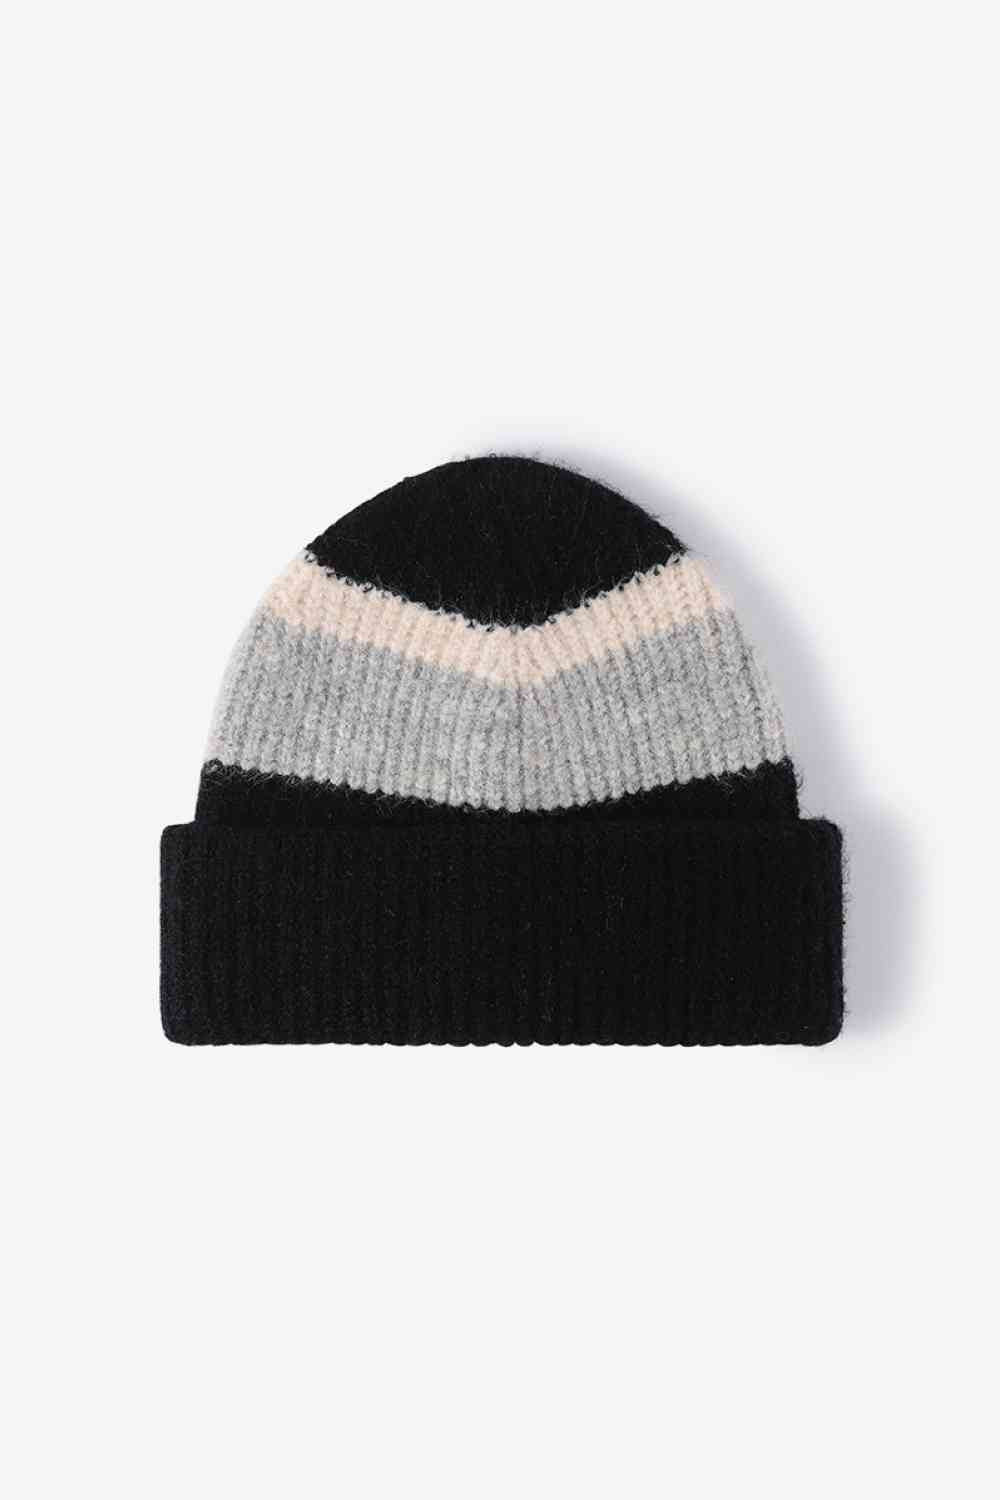 White Smoke Tricolor Cuffed Knit Beanie Sentient Beauty Fashions *Accessories